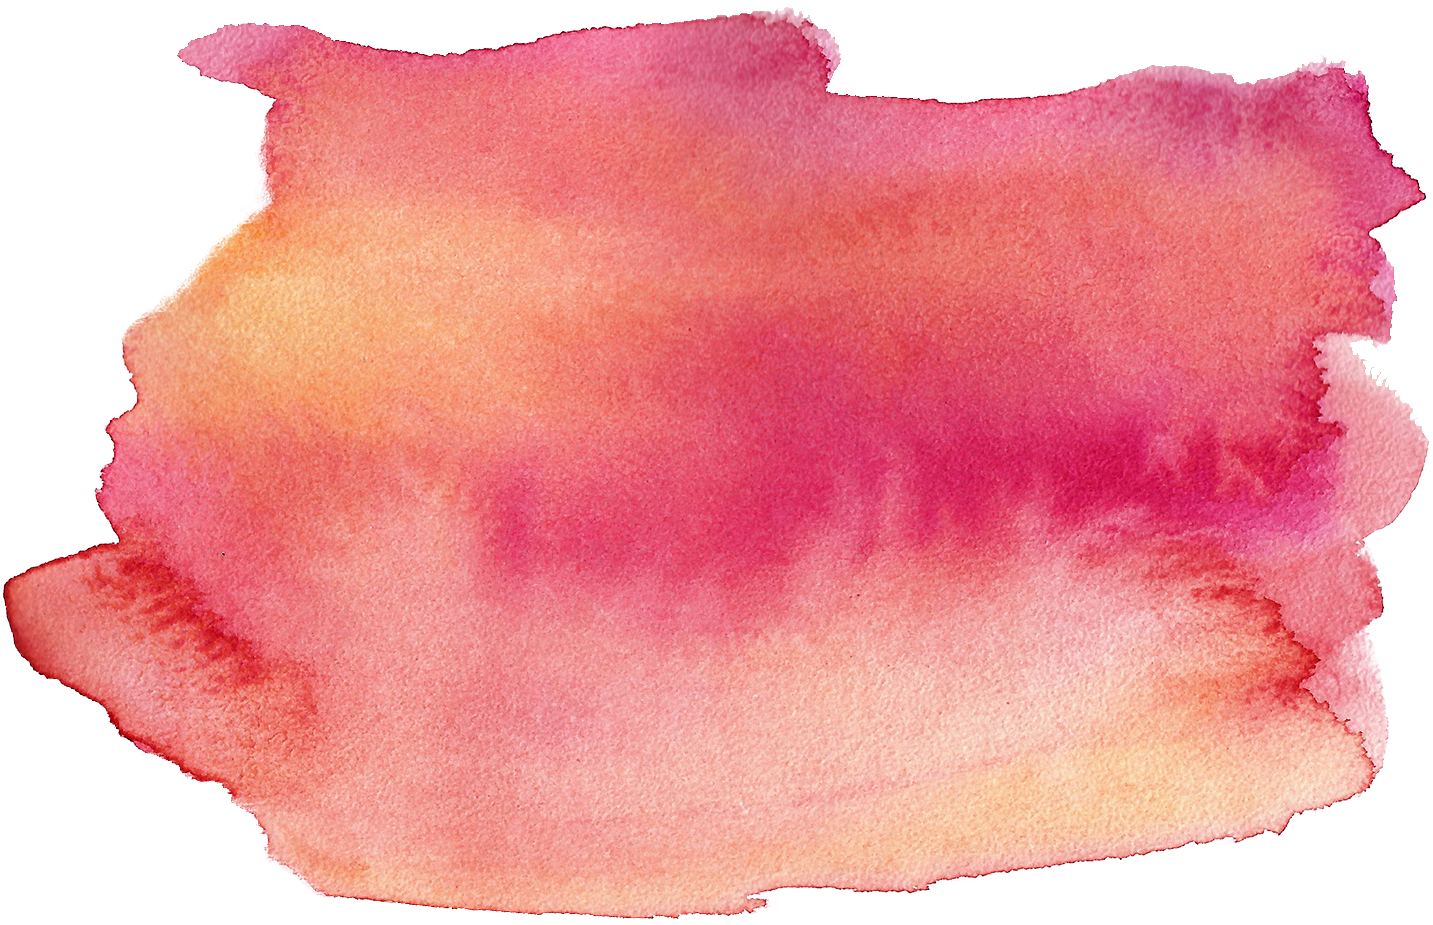 Watercolor painting Drawing Brush Pink watercolor effect orange and red abstract painting